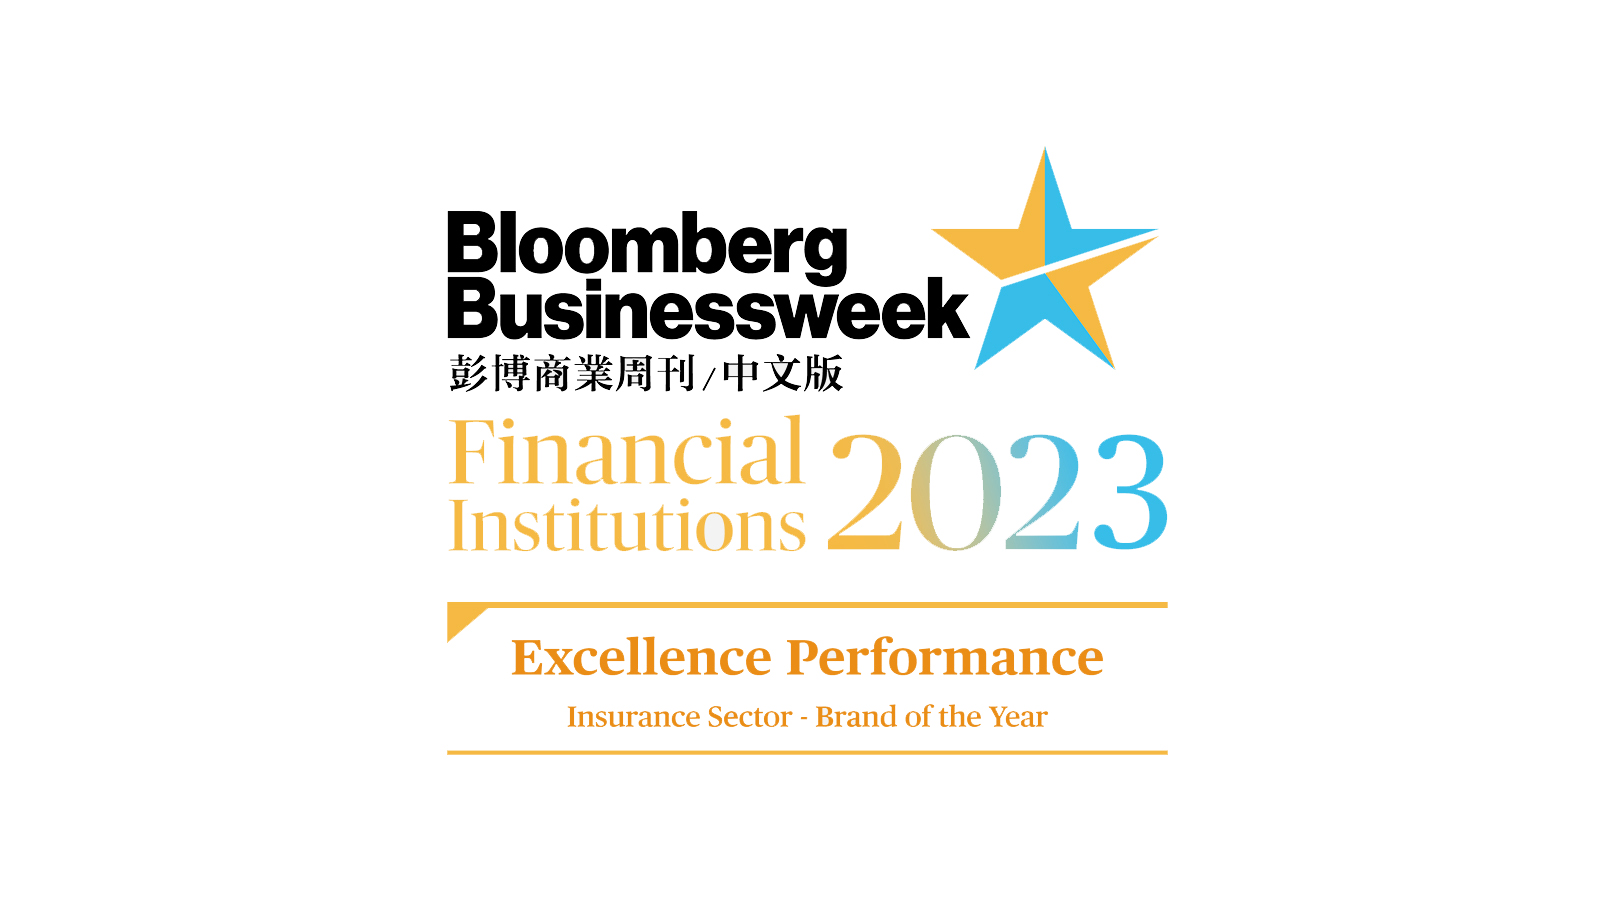 Bloomberg Businessweek Financial Institution Awards 2020 - Excellence Performance - Insurance -Brand of the Year.